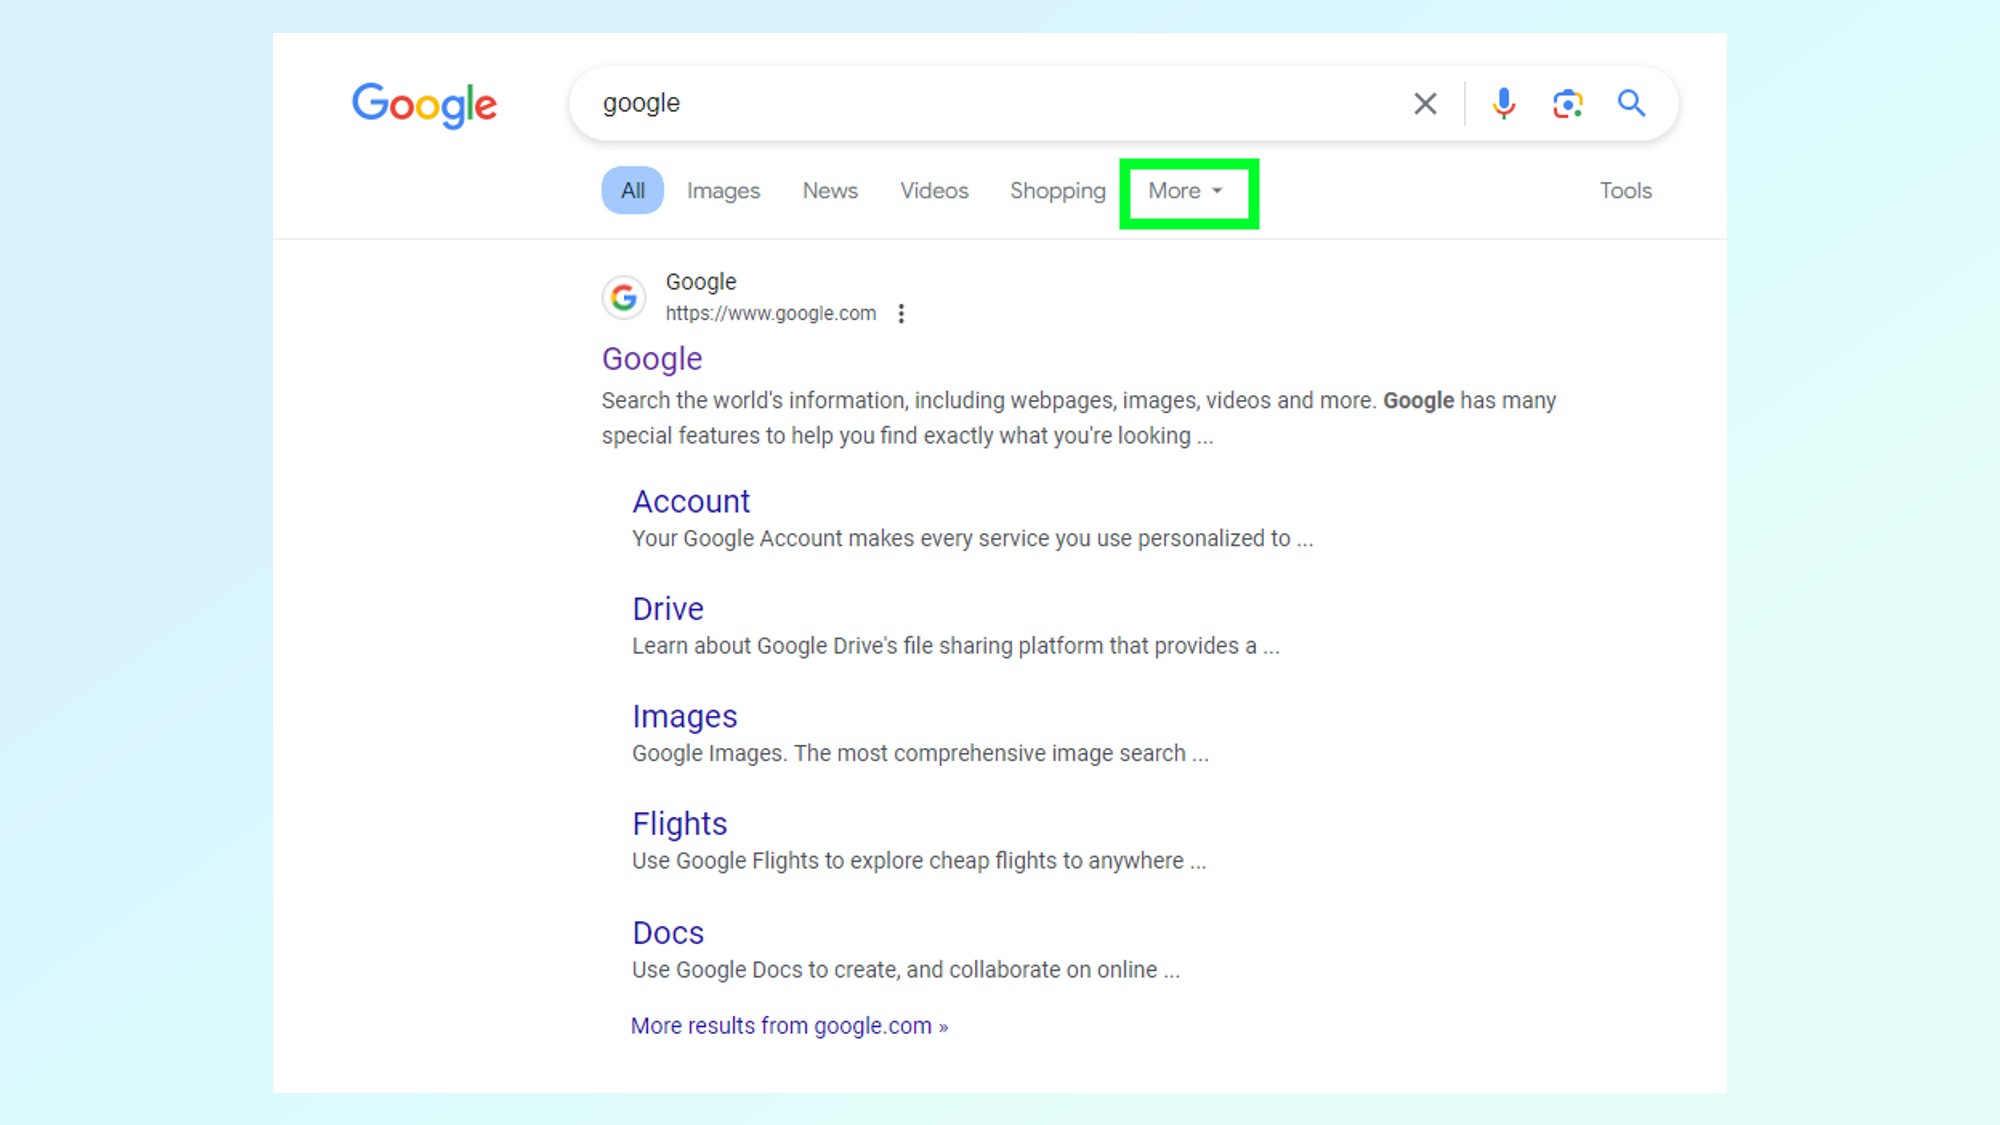 The Google Search results page with the More dropdown menu highlighted by a green square